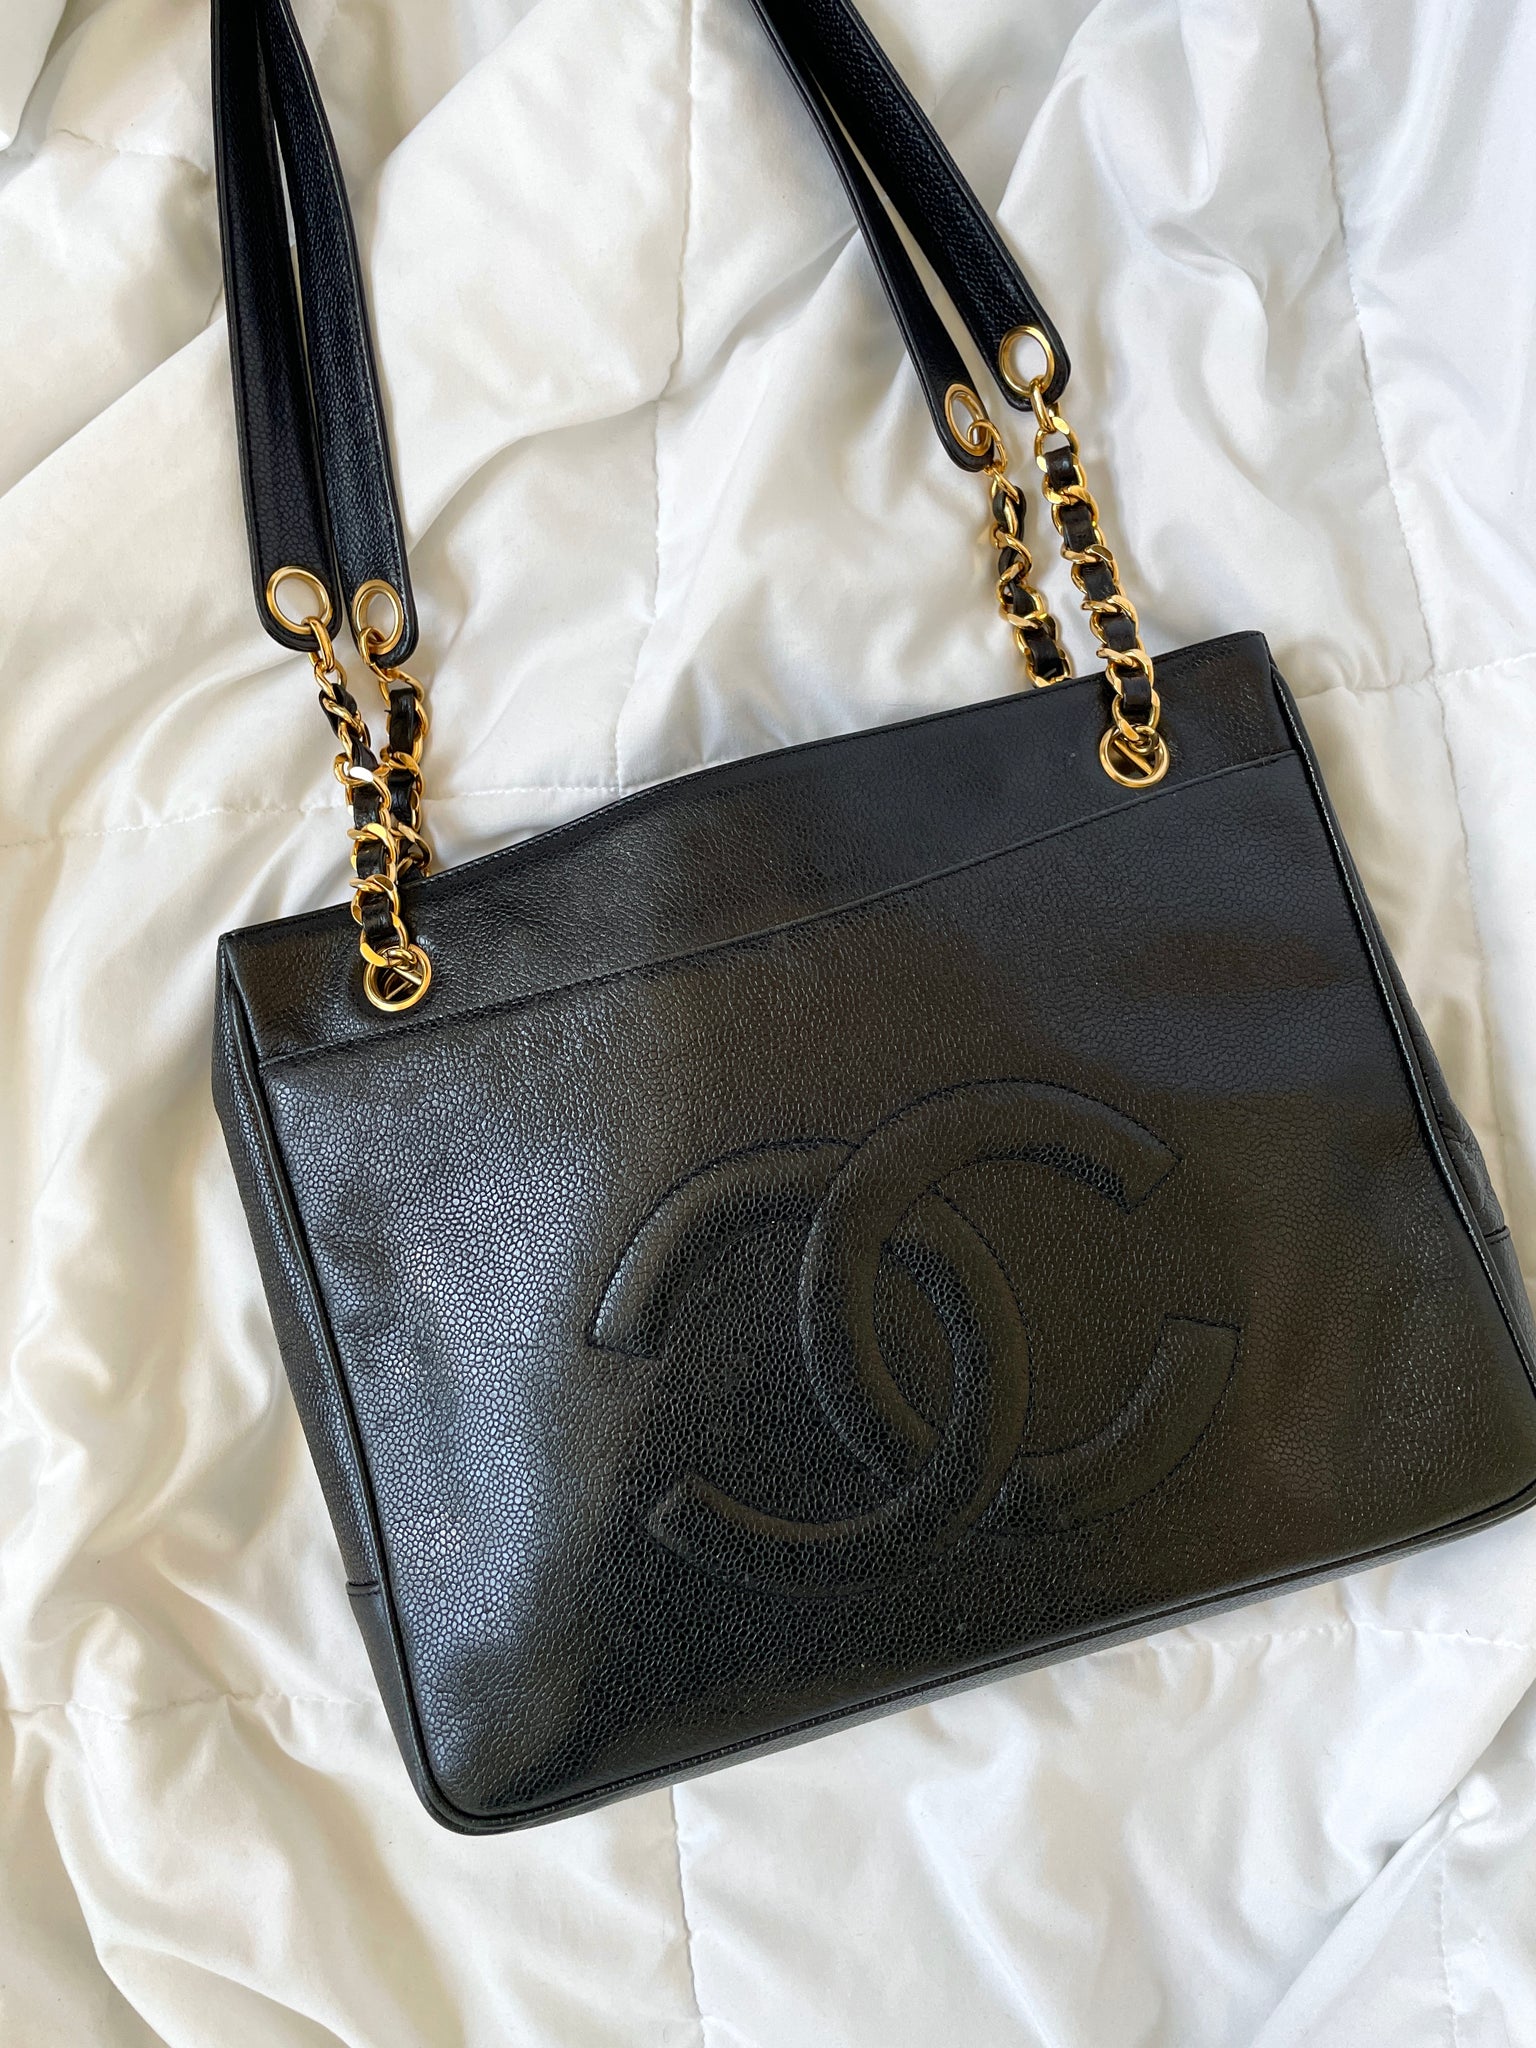 Chanel Caviar Quilted CC Pocket Bucket Bag Black Gold Hardware  Coco  Approved Studio